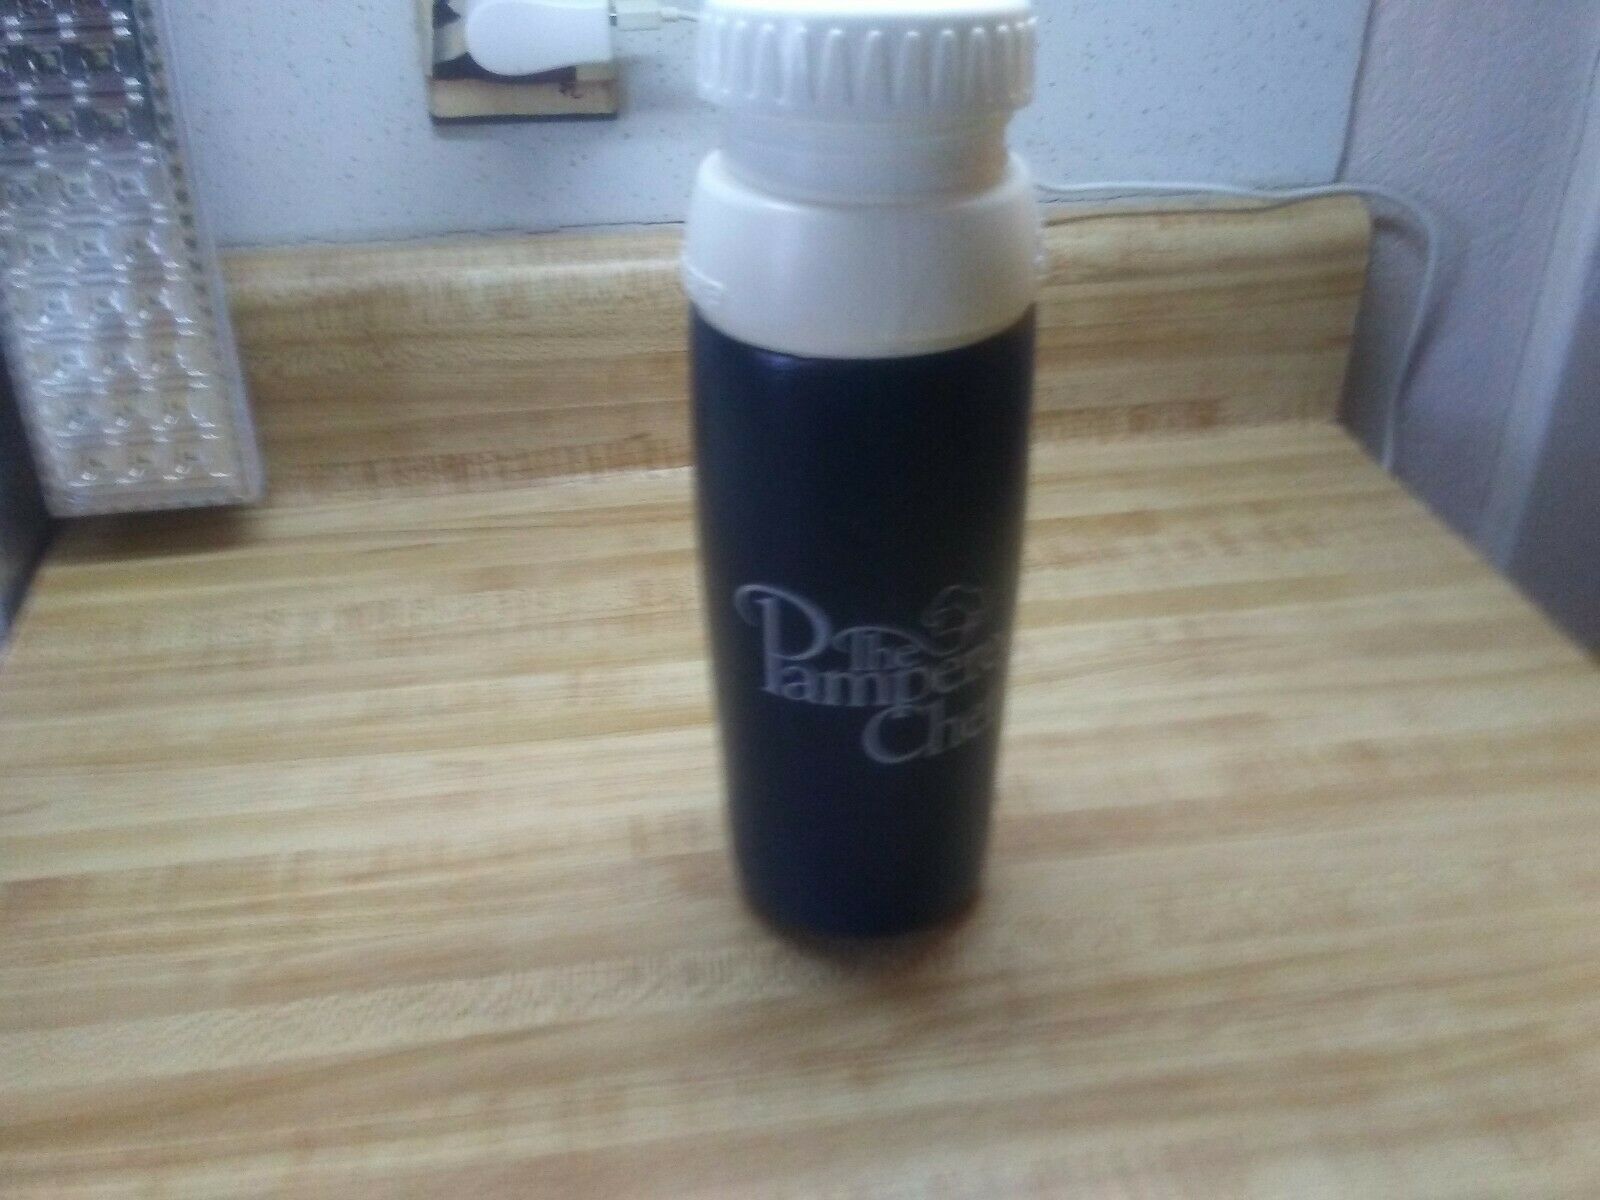 Rare find The Pampered Chef water bottle - $28.49